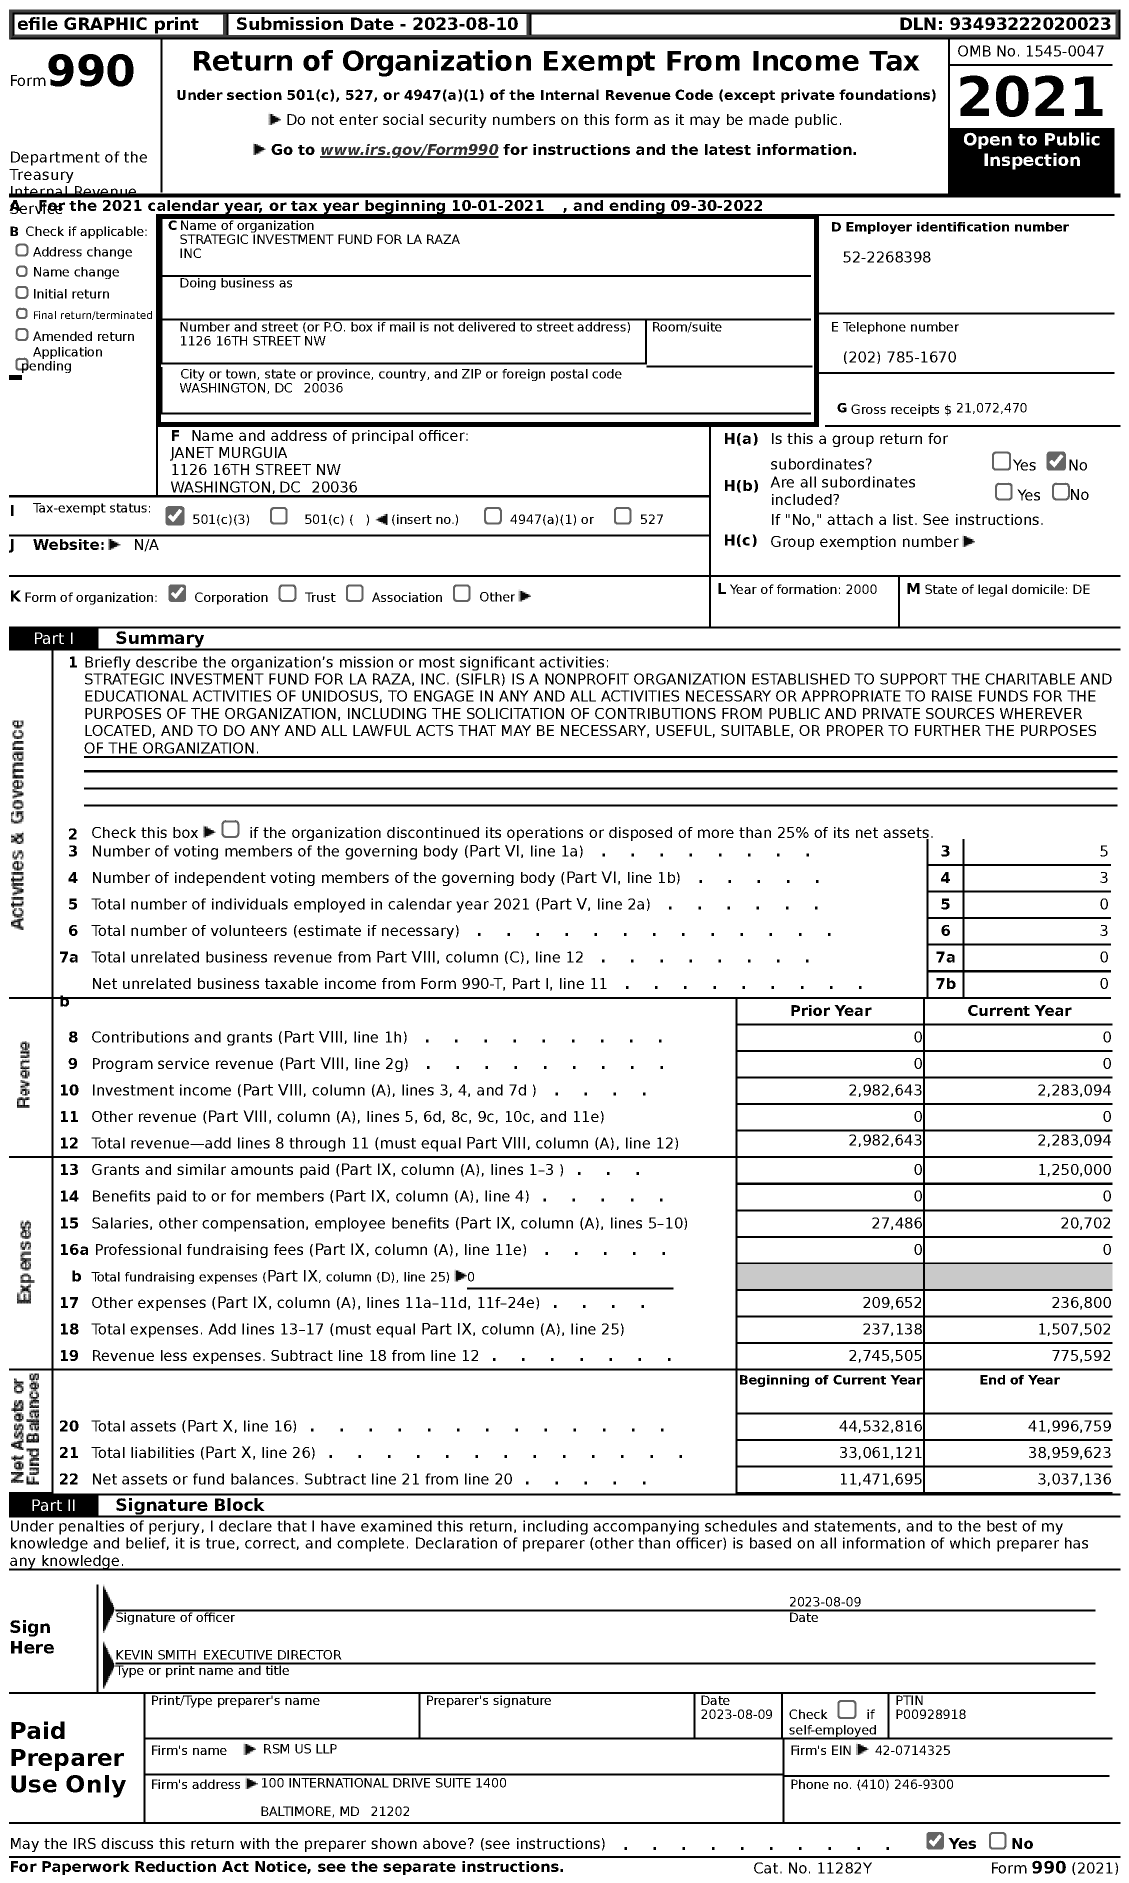 Image of first page of 2021 Form 990 for Strategic Investment Fund for La Raza (SIFLR)